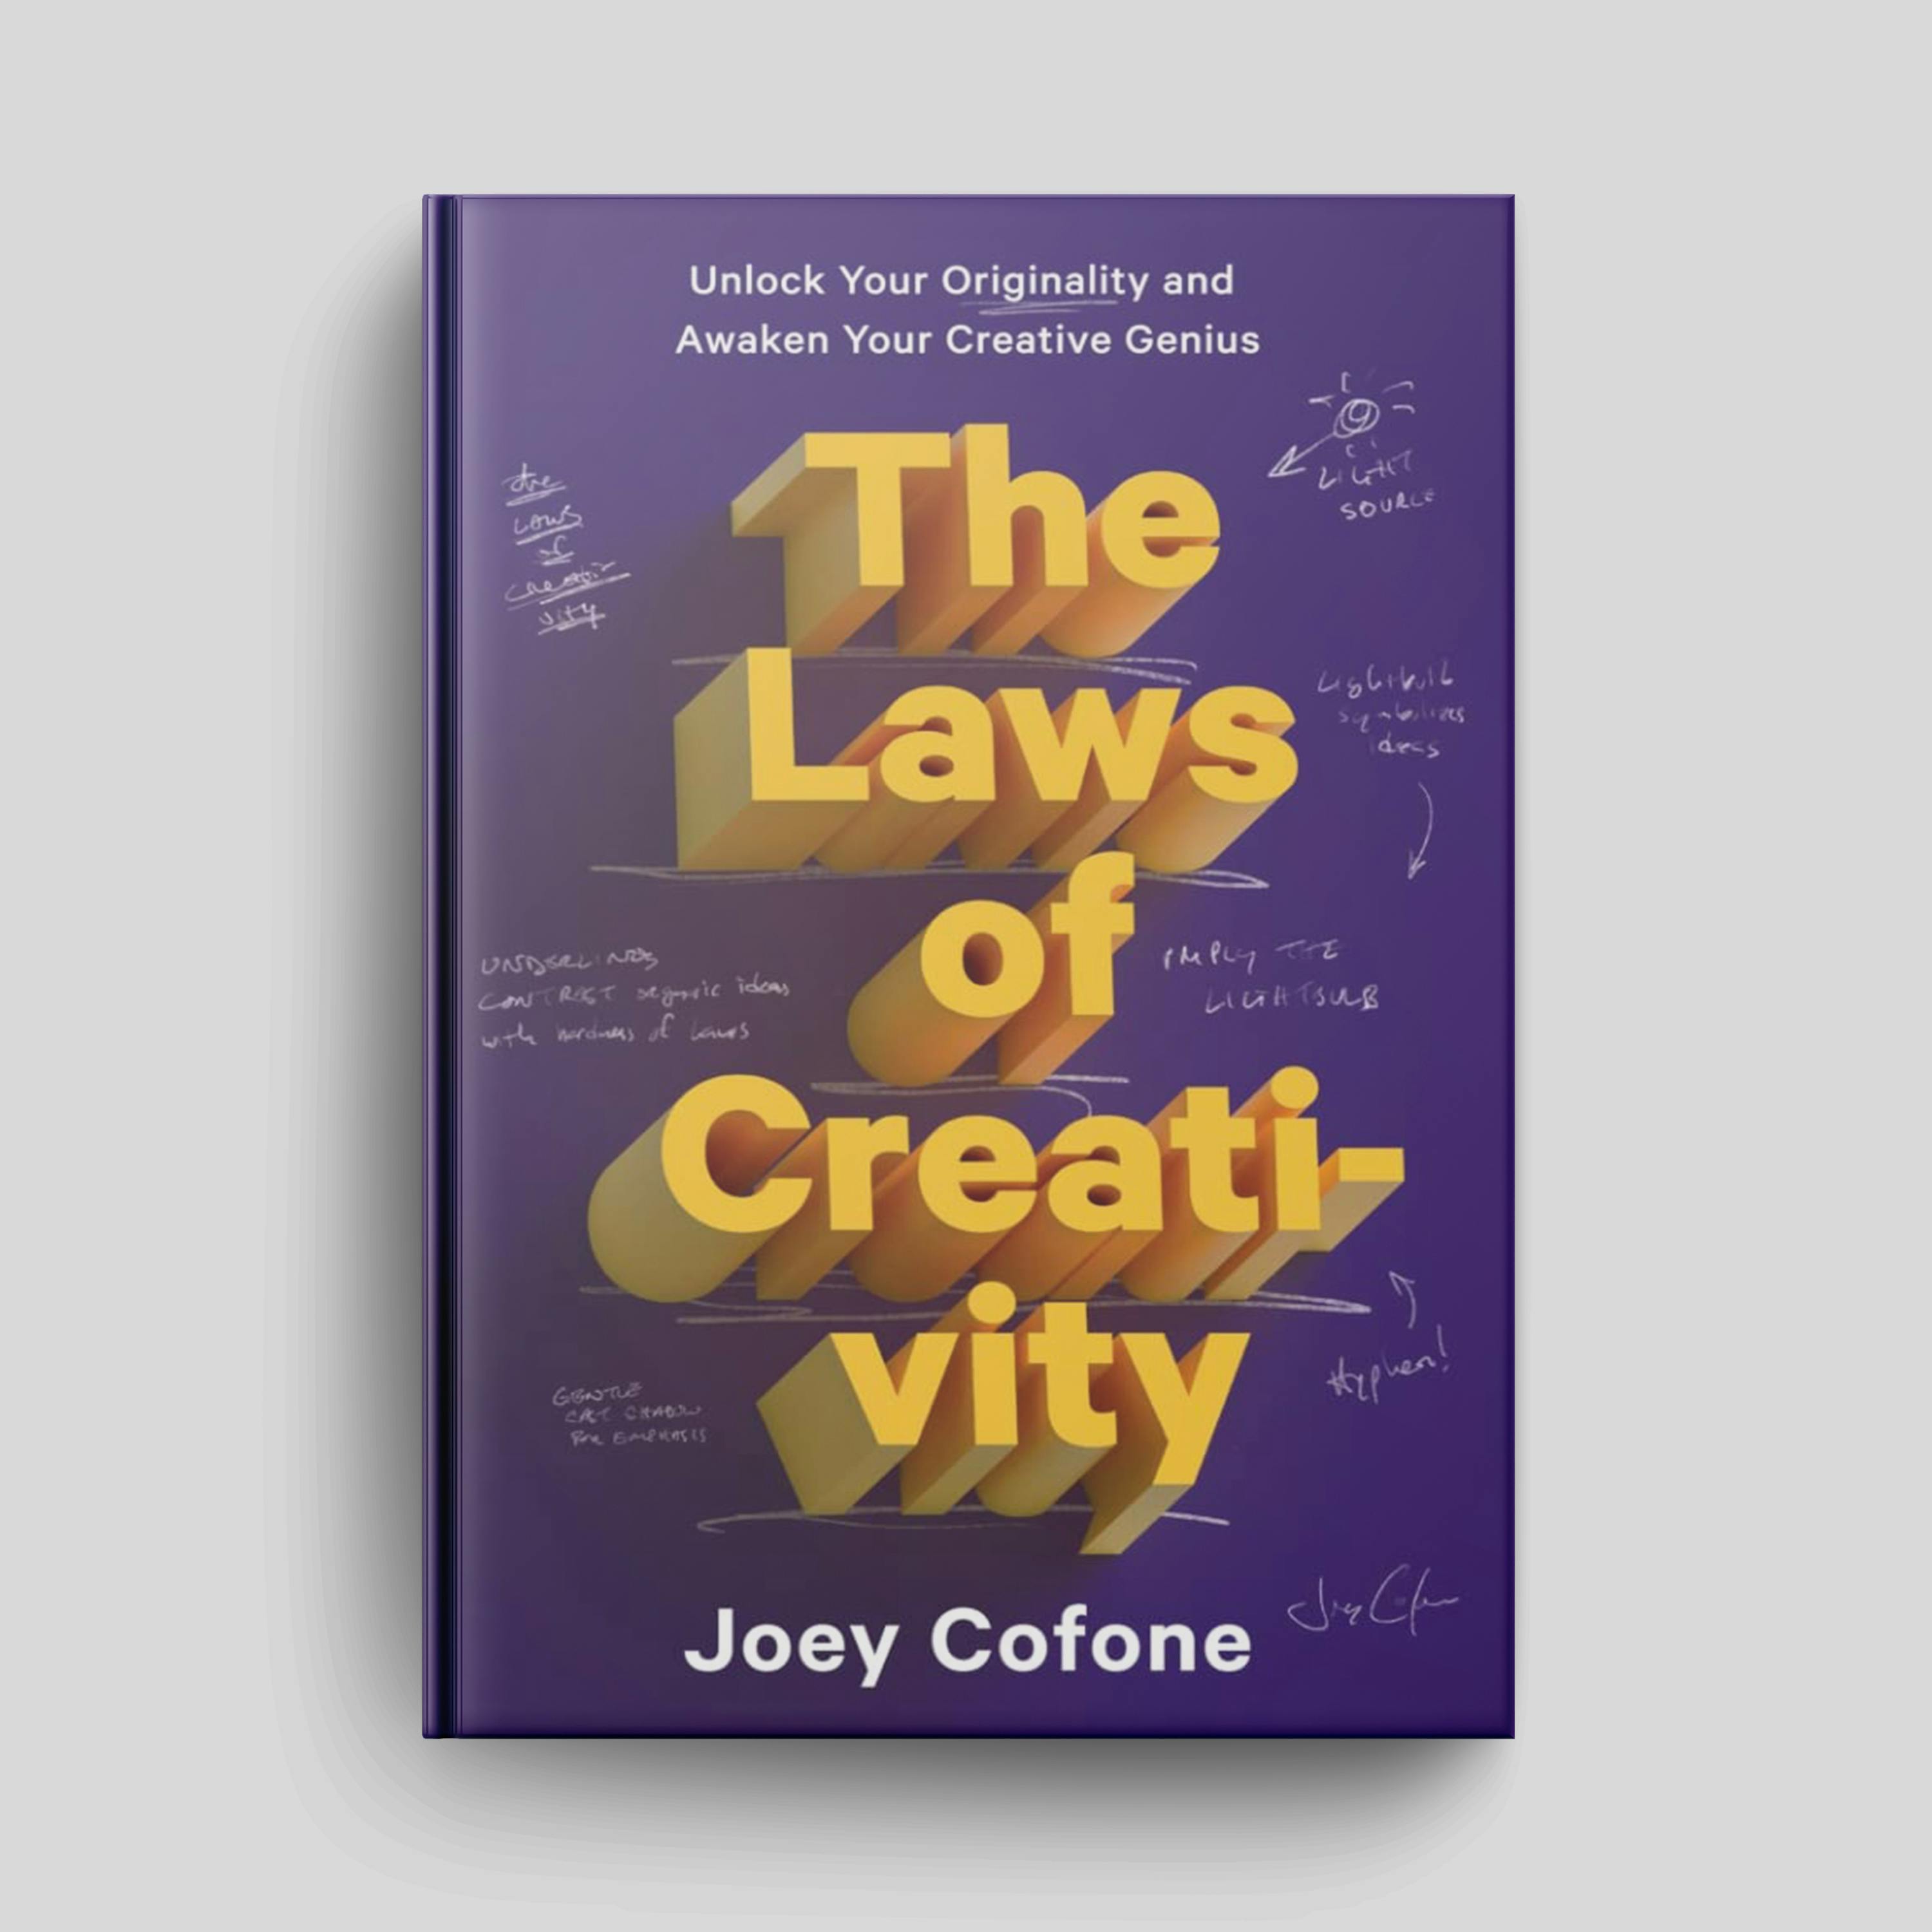 Book: "The Laws of Creativity: How to Unlock Your Originality and Awaken Your Creative Genius" | Episode #142